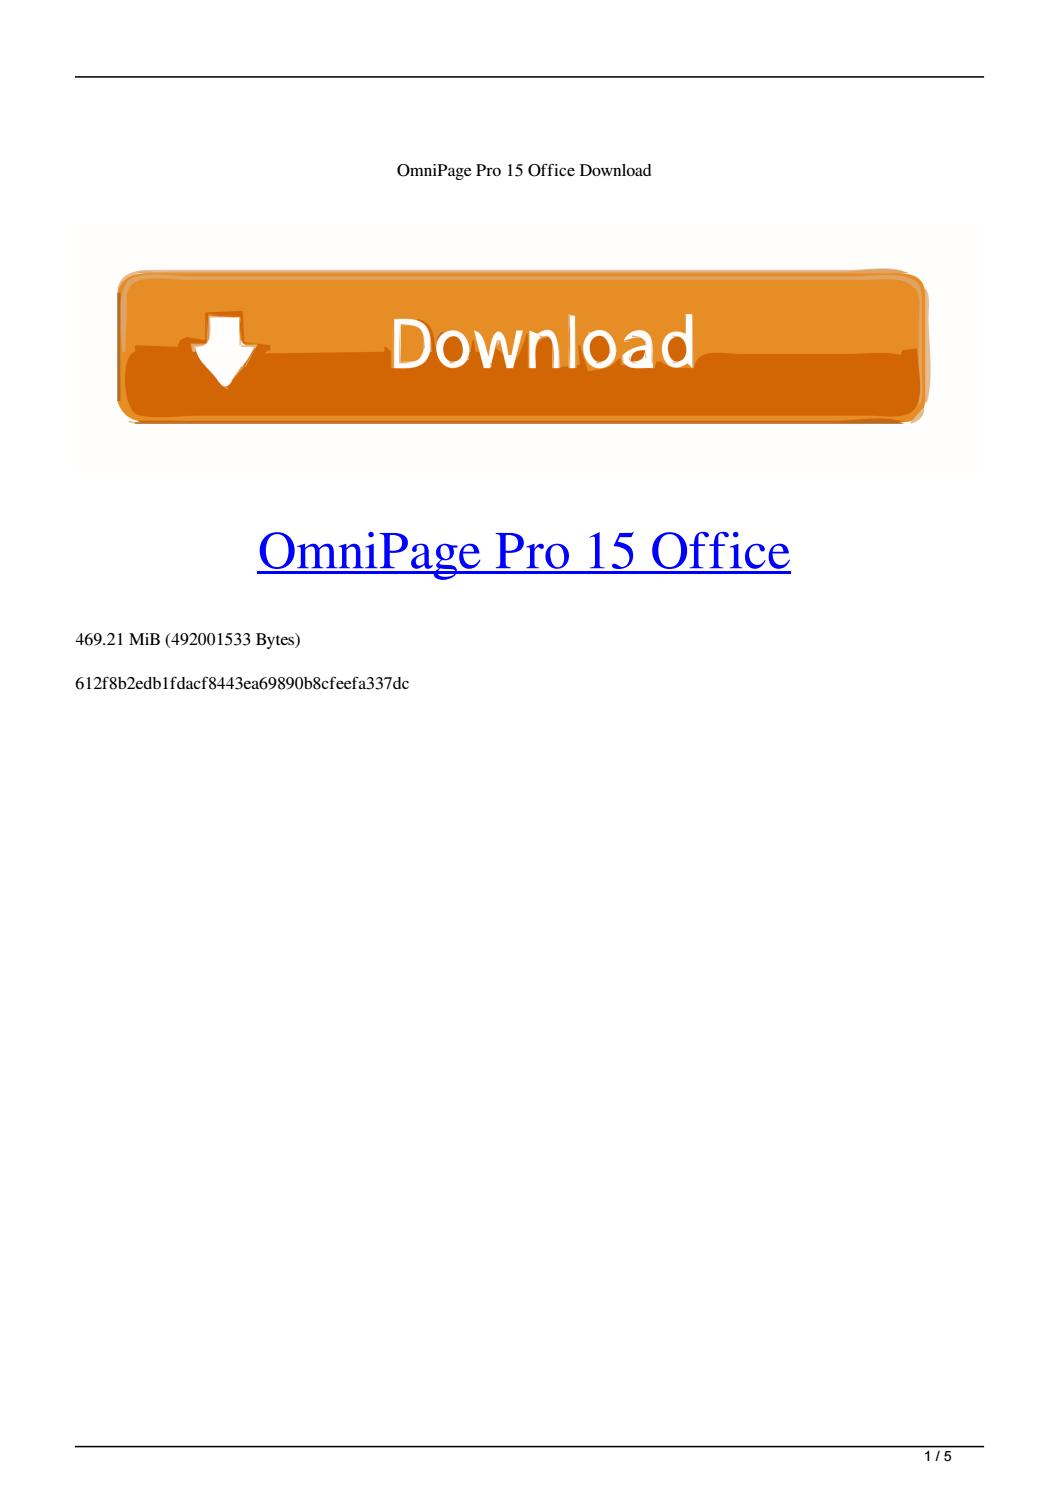 omnipage pro download crack